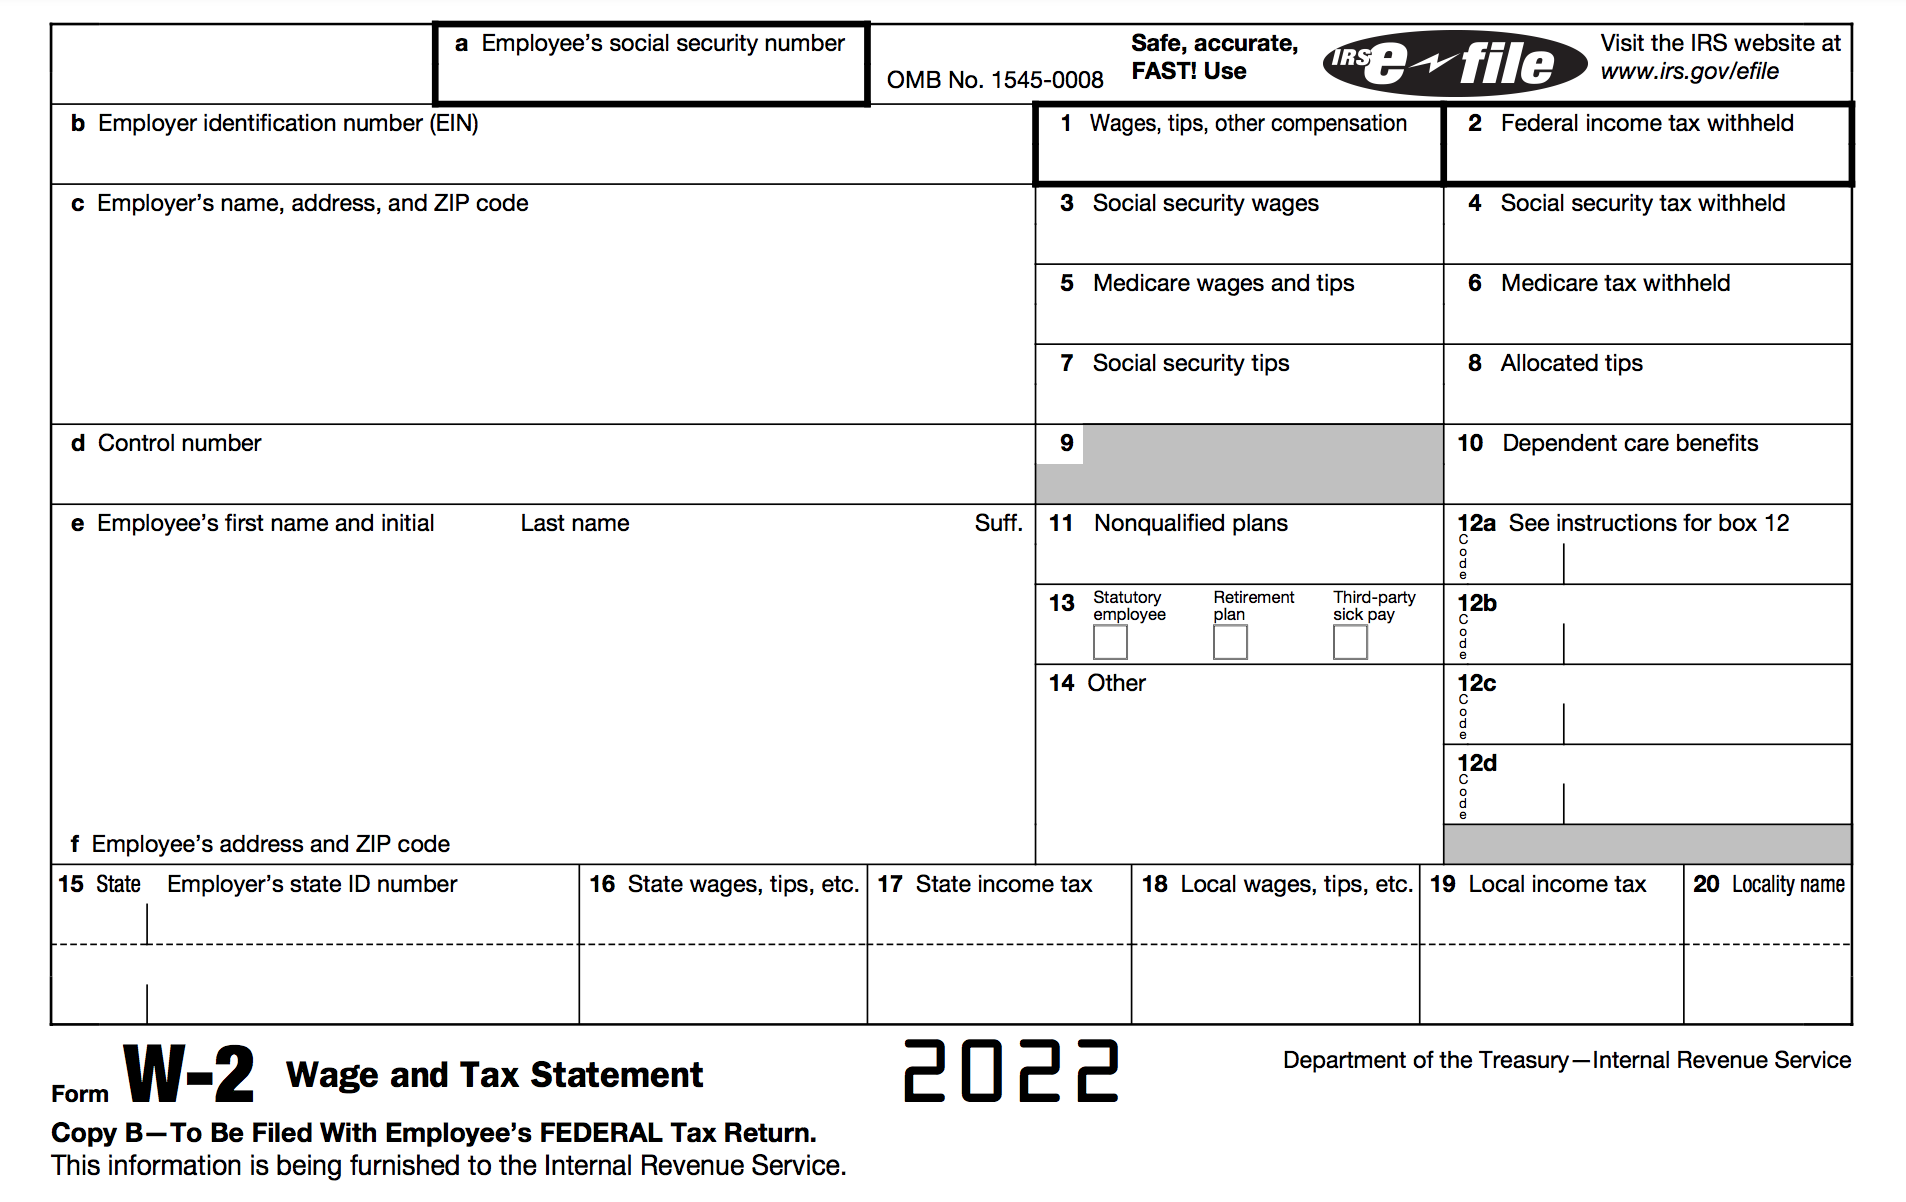 How To Fill Out A W-2 Tax Form | Smartasset inside Best Buy W2 Forms